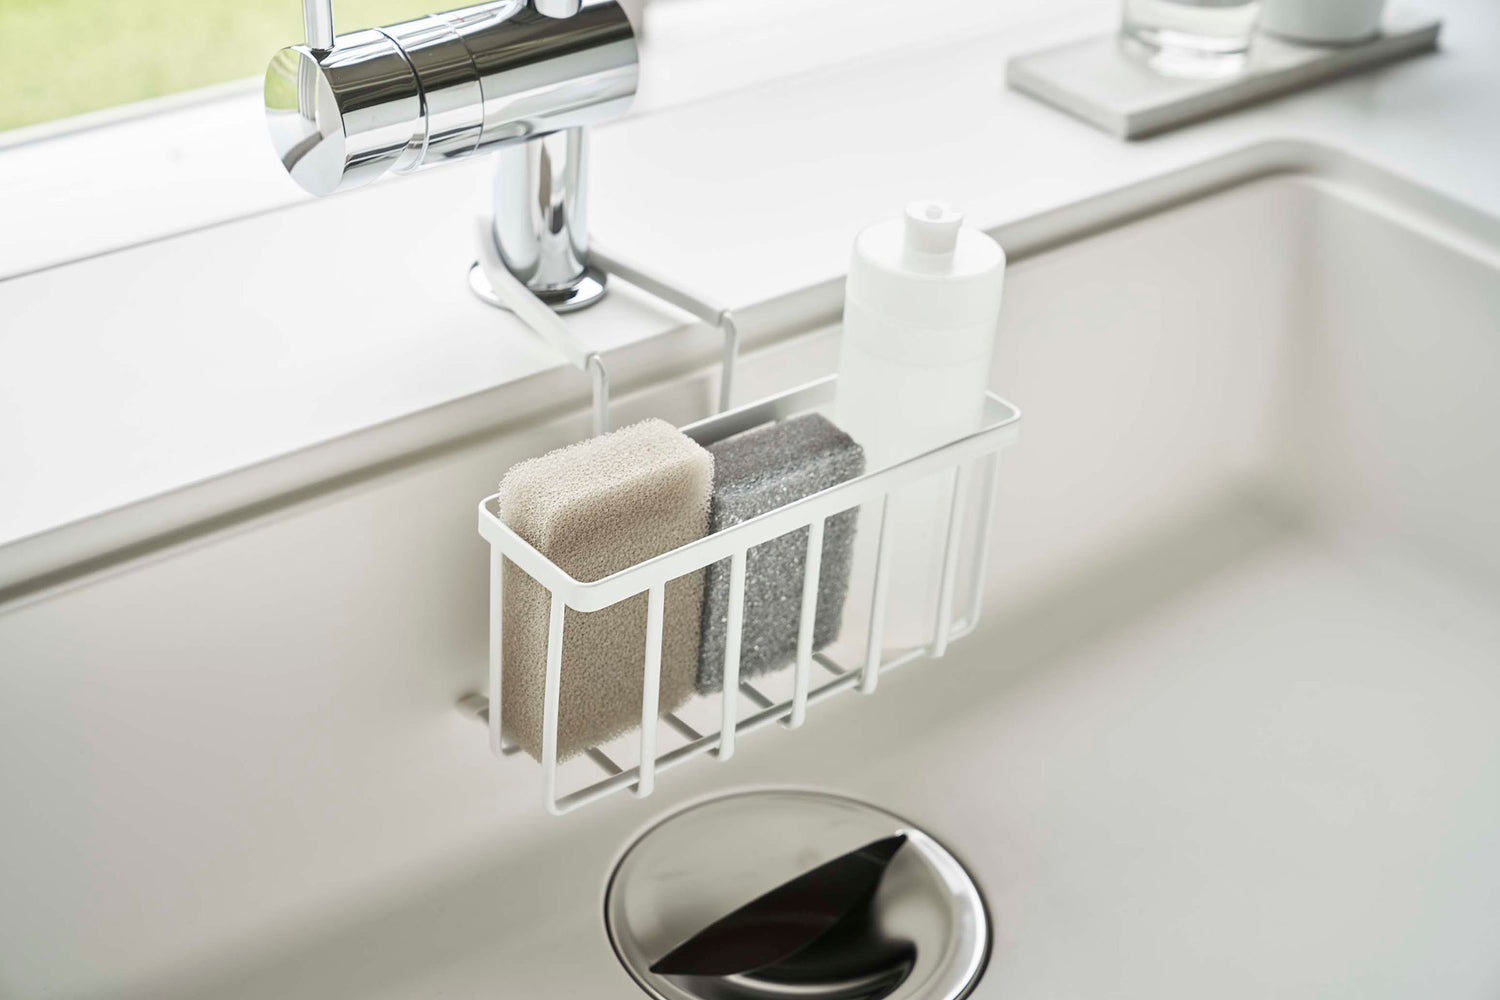 View 5 - Side view of Yamazaki Home white Faucet-Hanging Sponge Caddy in a sink